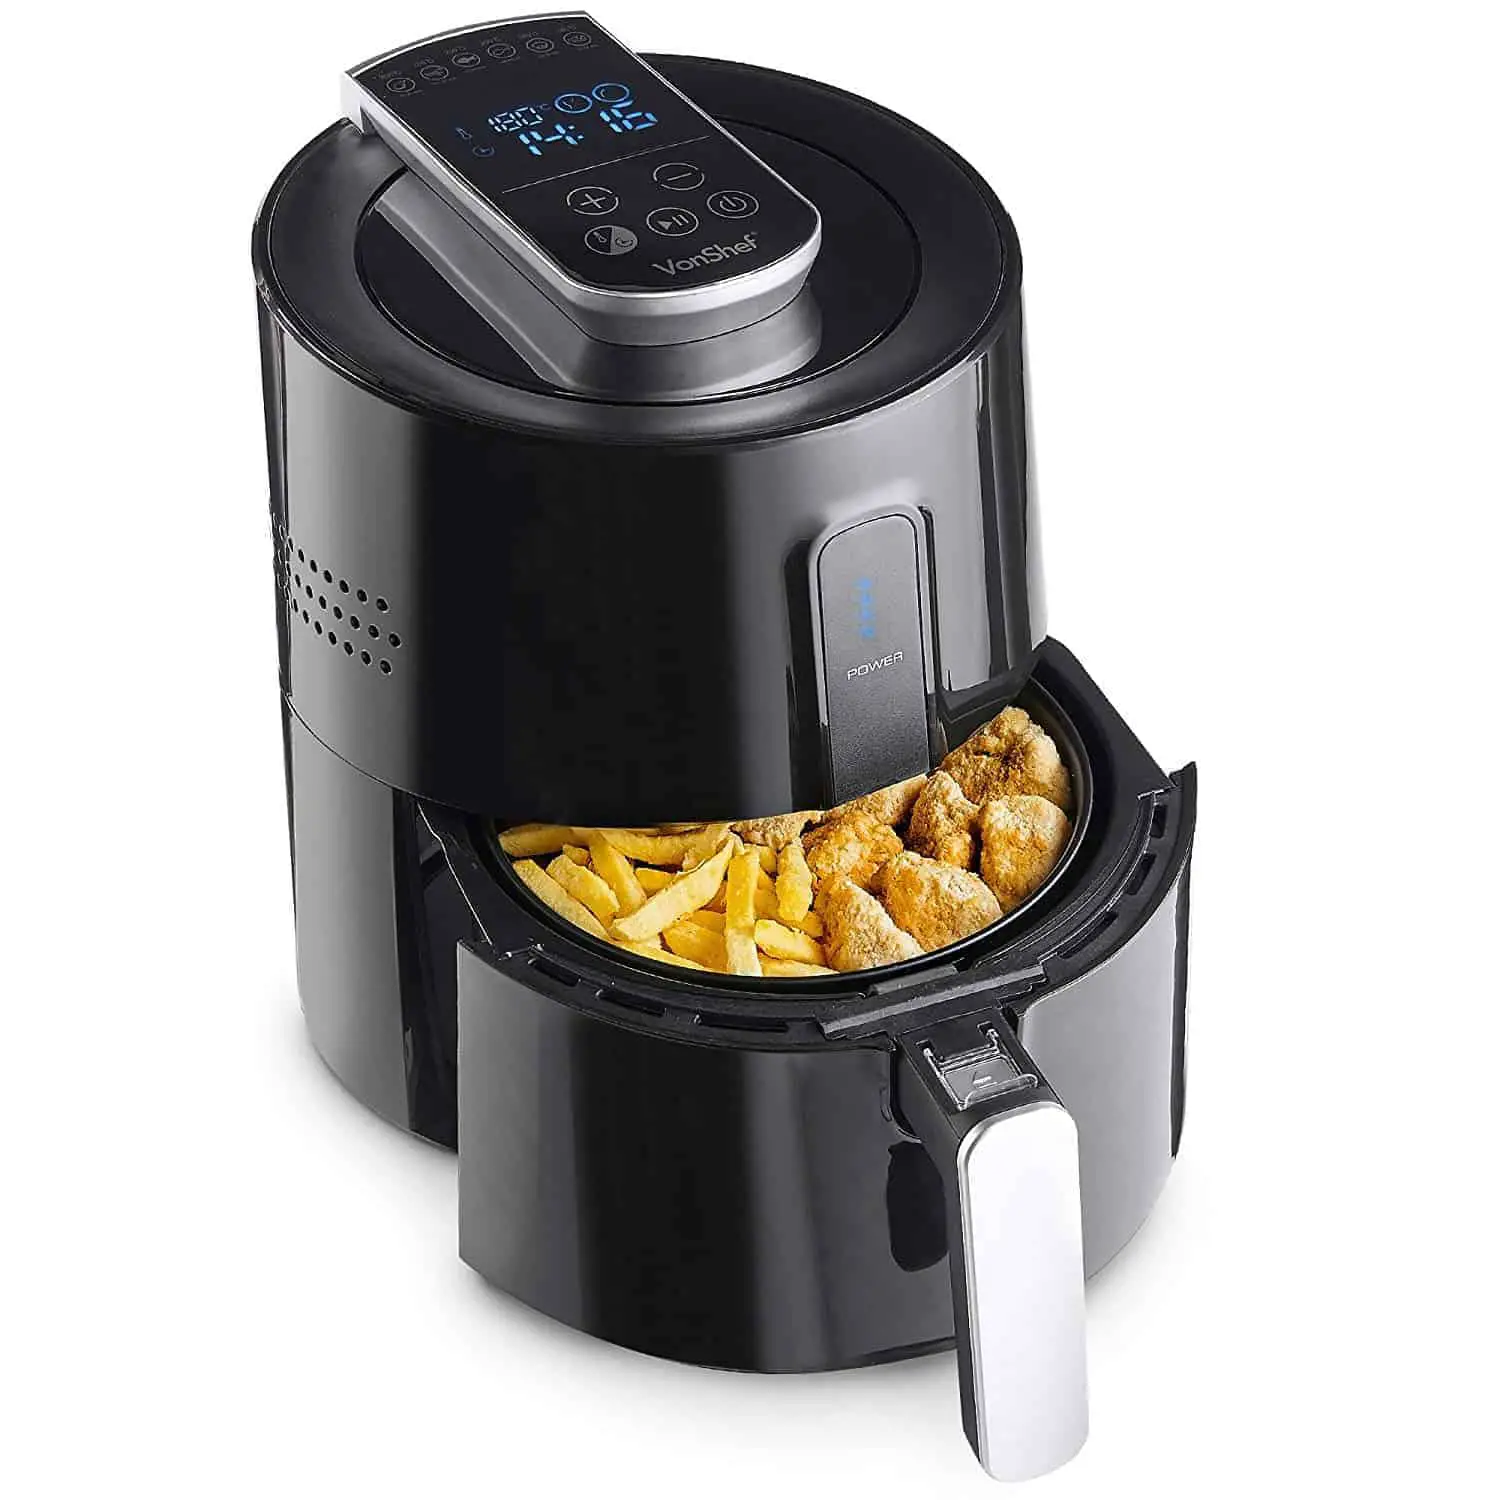 5 Best Air Fryer Black Friday Deals of (May) 2019